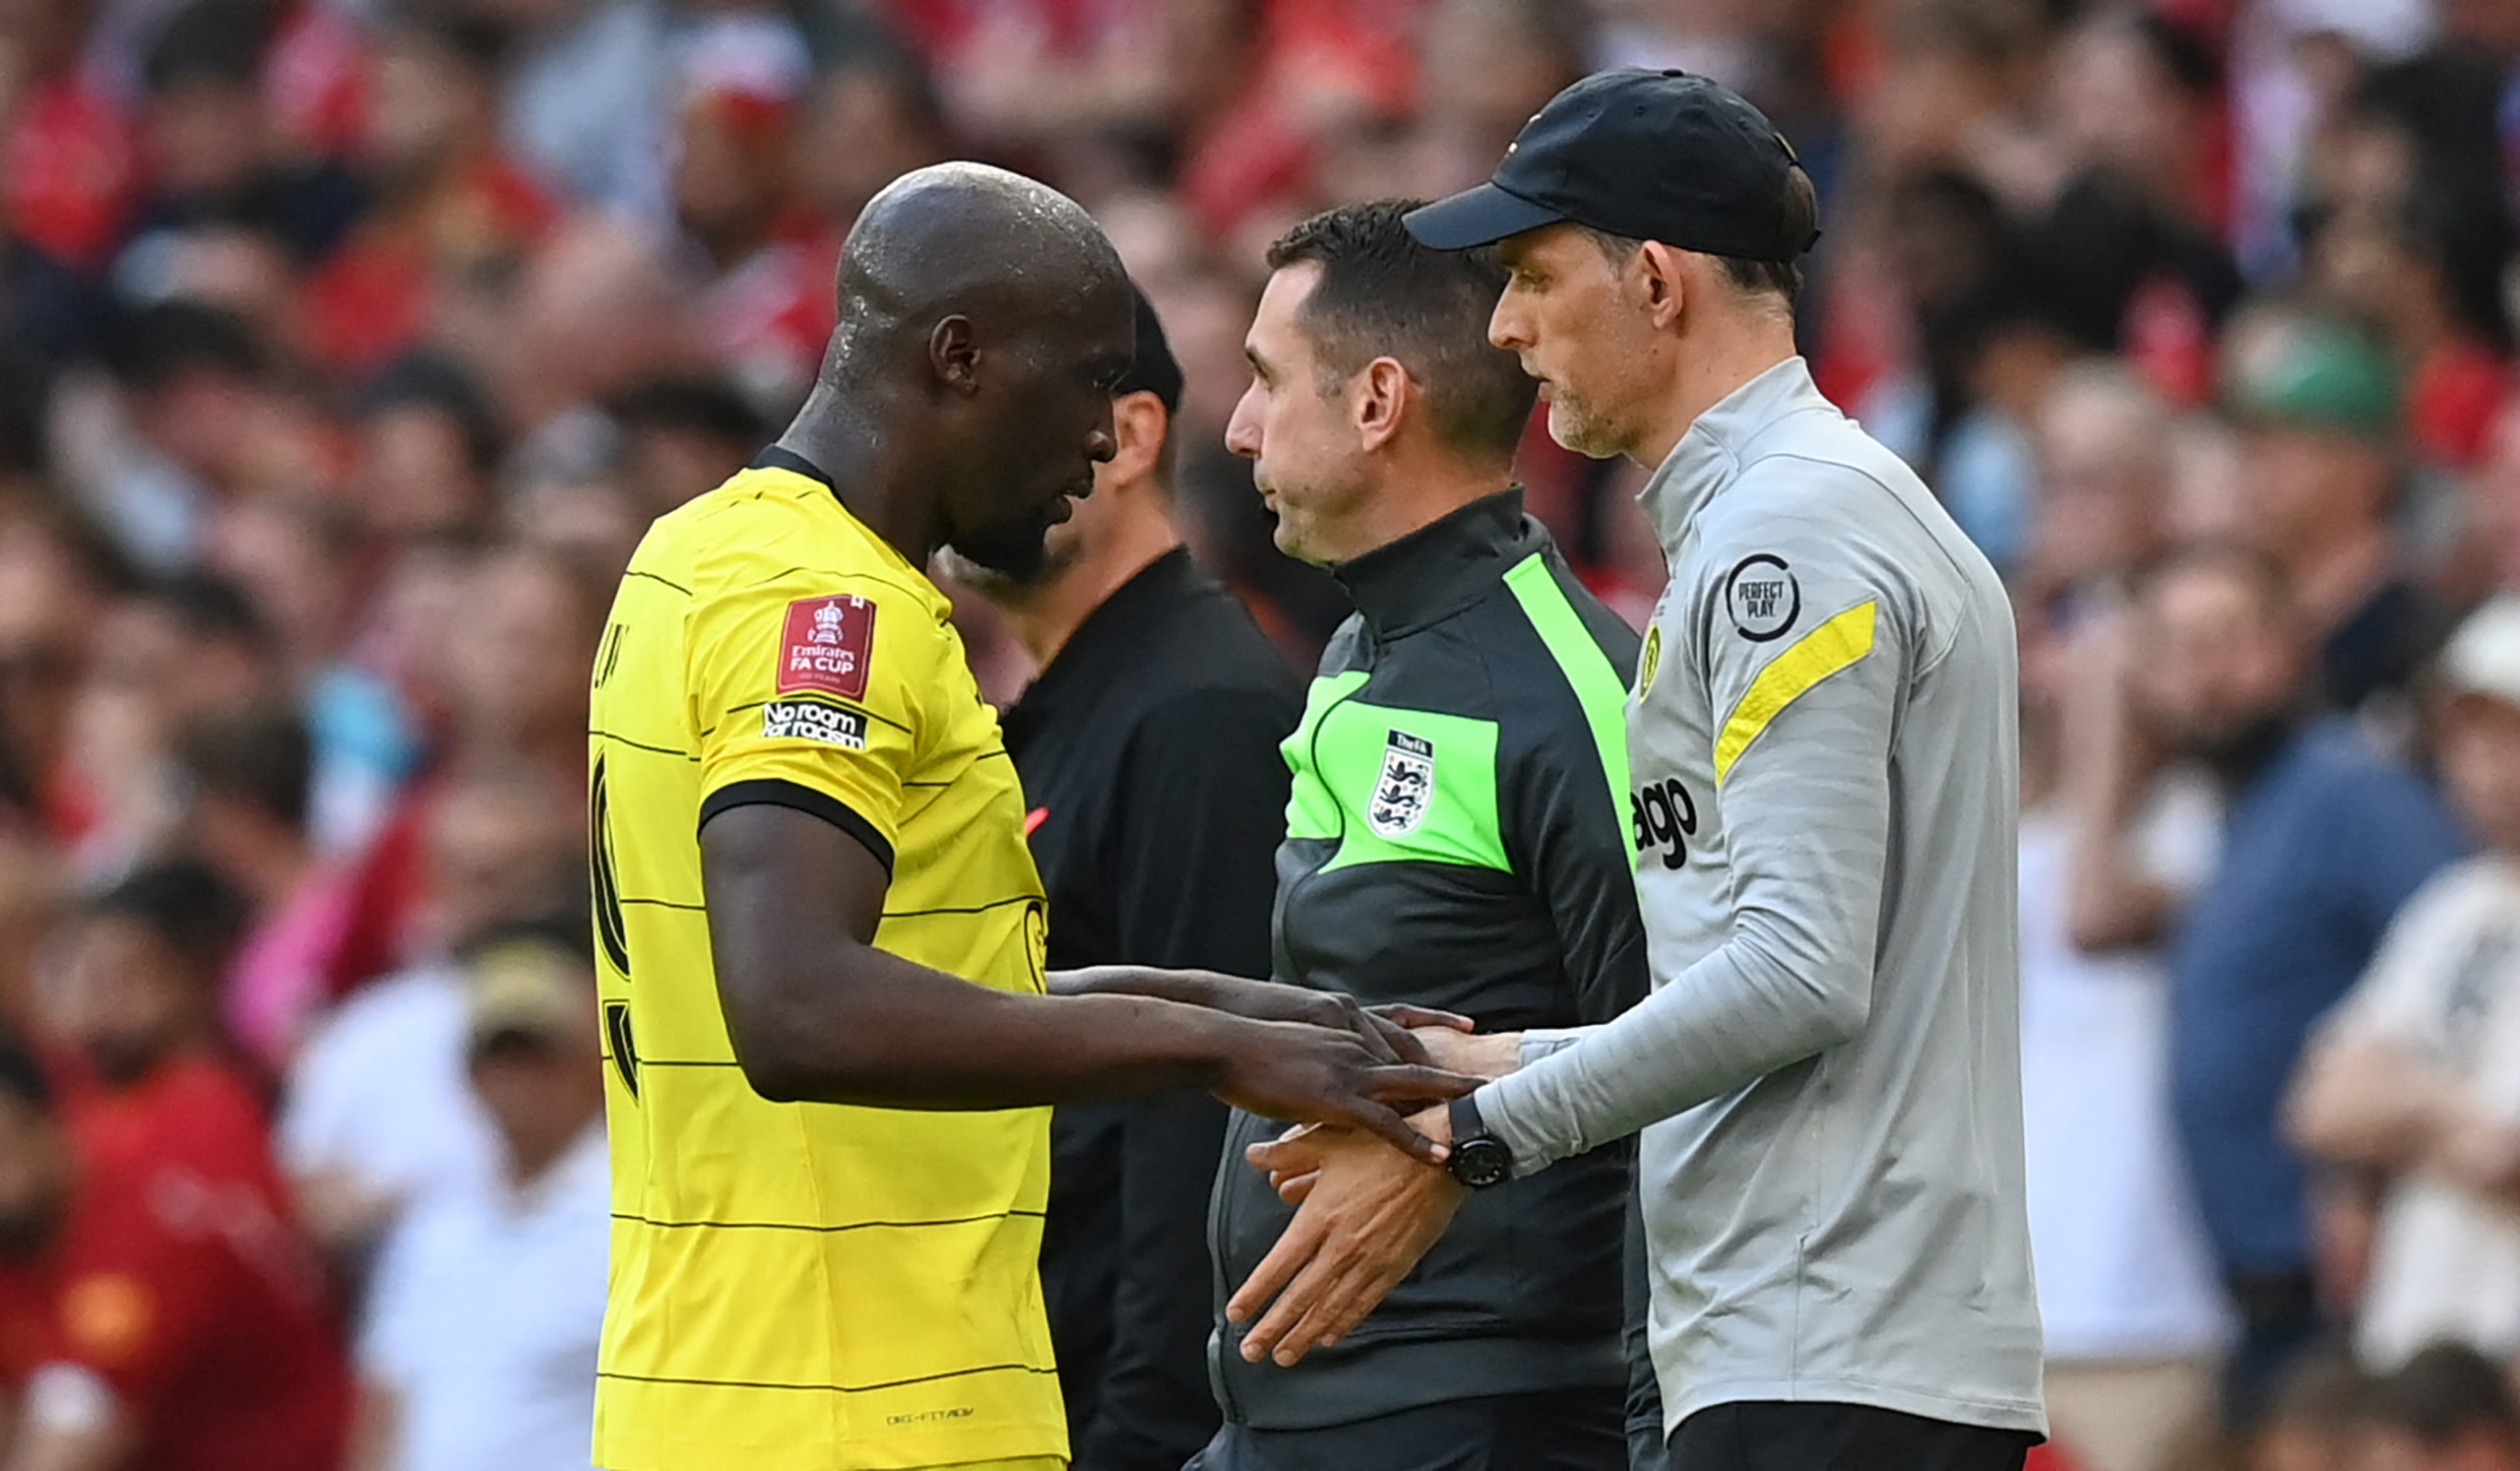 Chelsea suddenly firing Thomas Tuchel might alter the future of Romelu Lukaku, who pushed his way out due to a poor relationship with him.